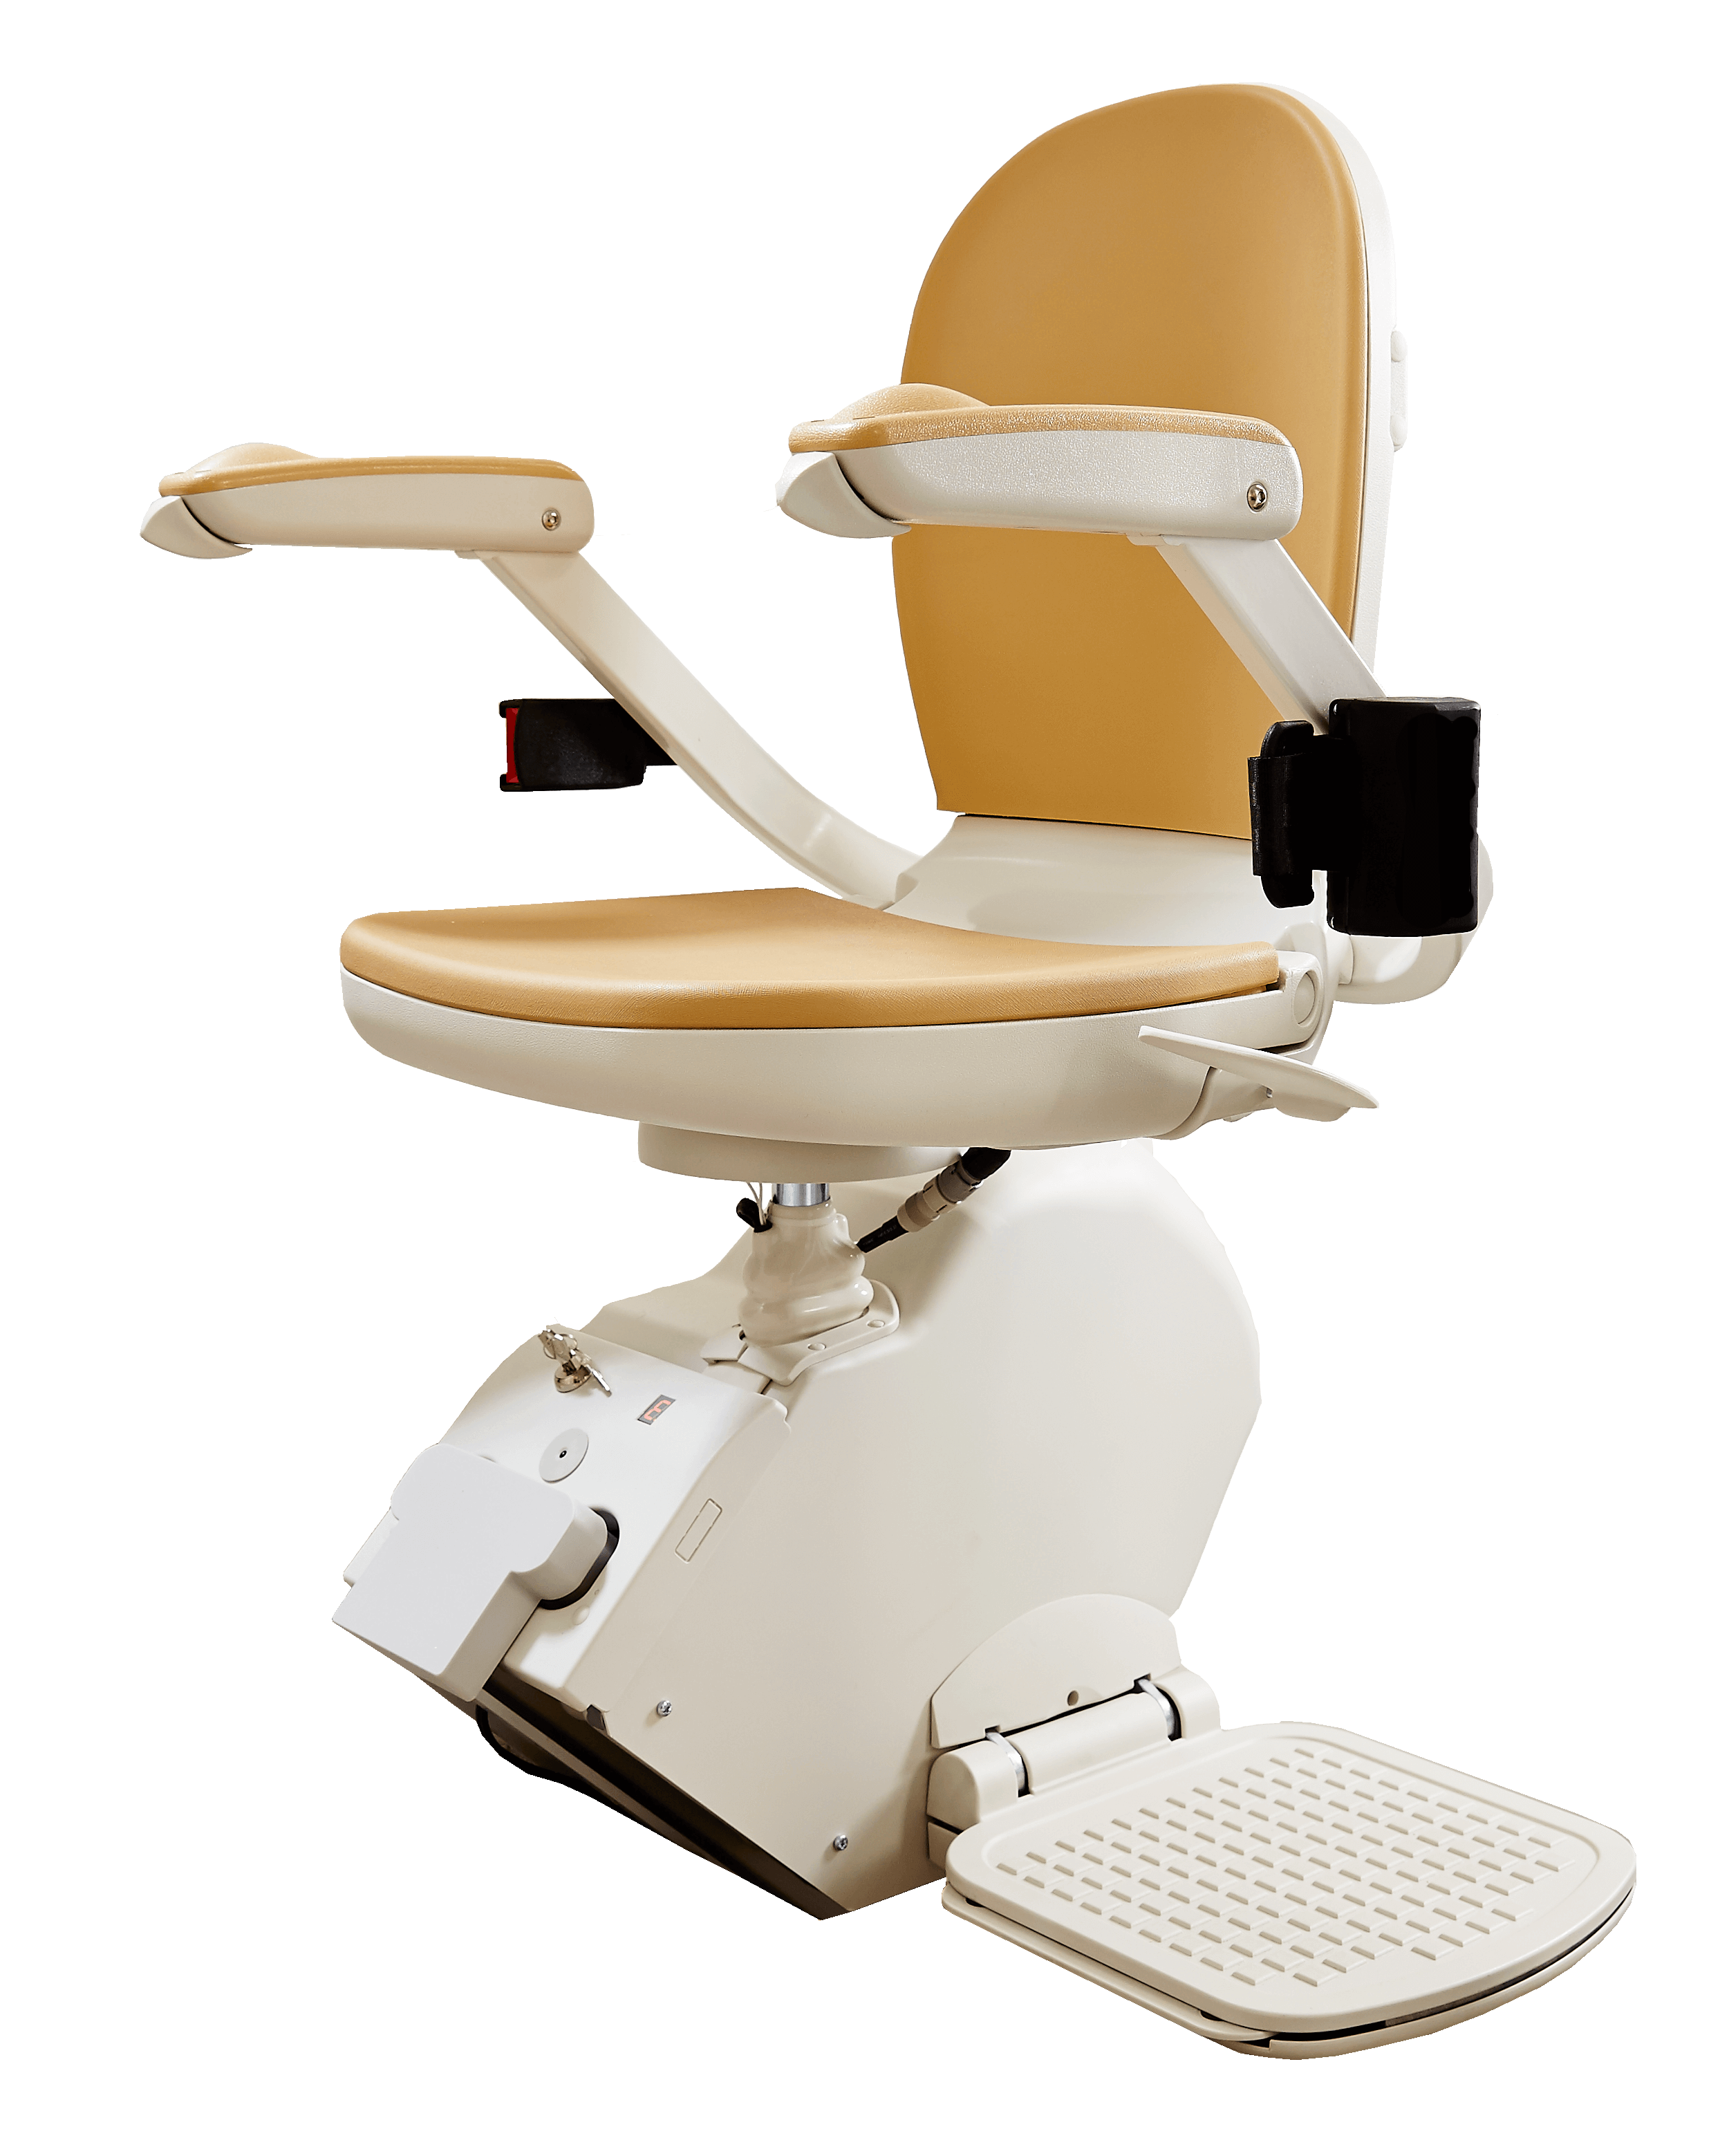 Acorn straight Stairlift at an angle